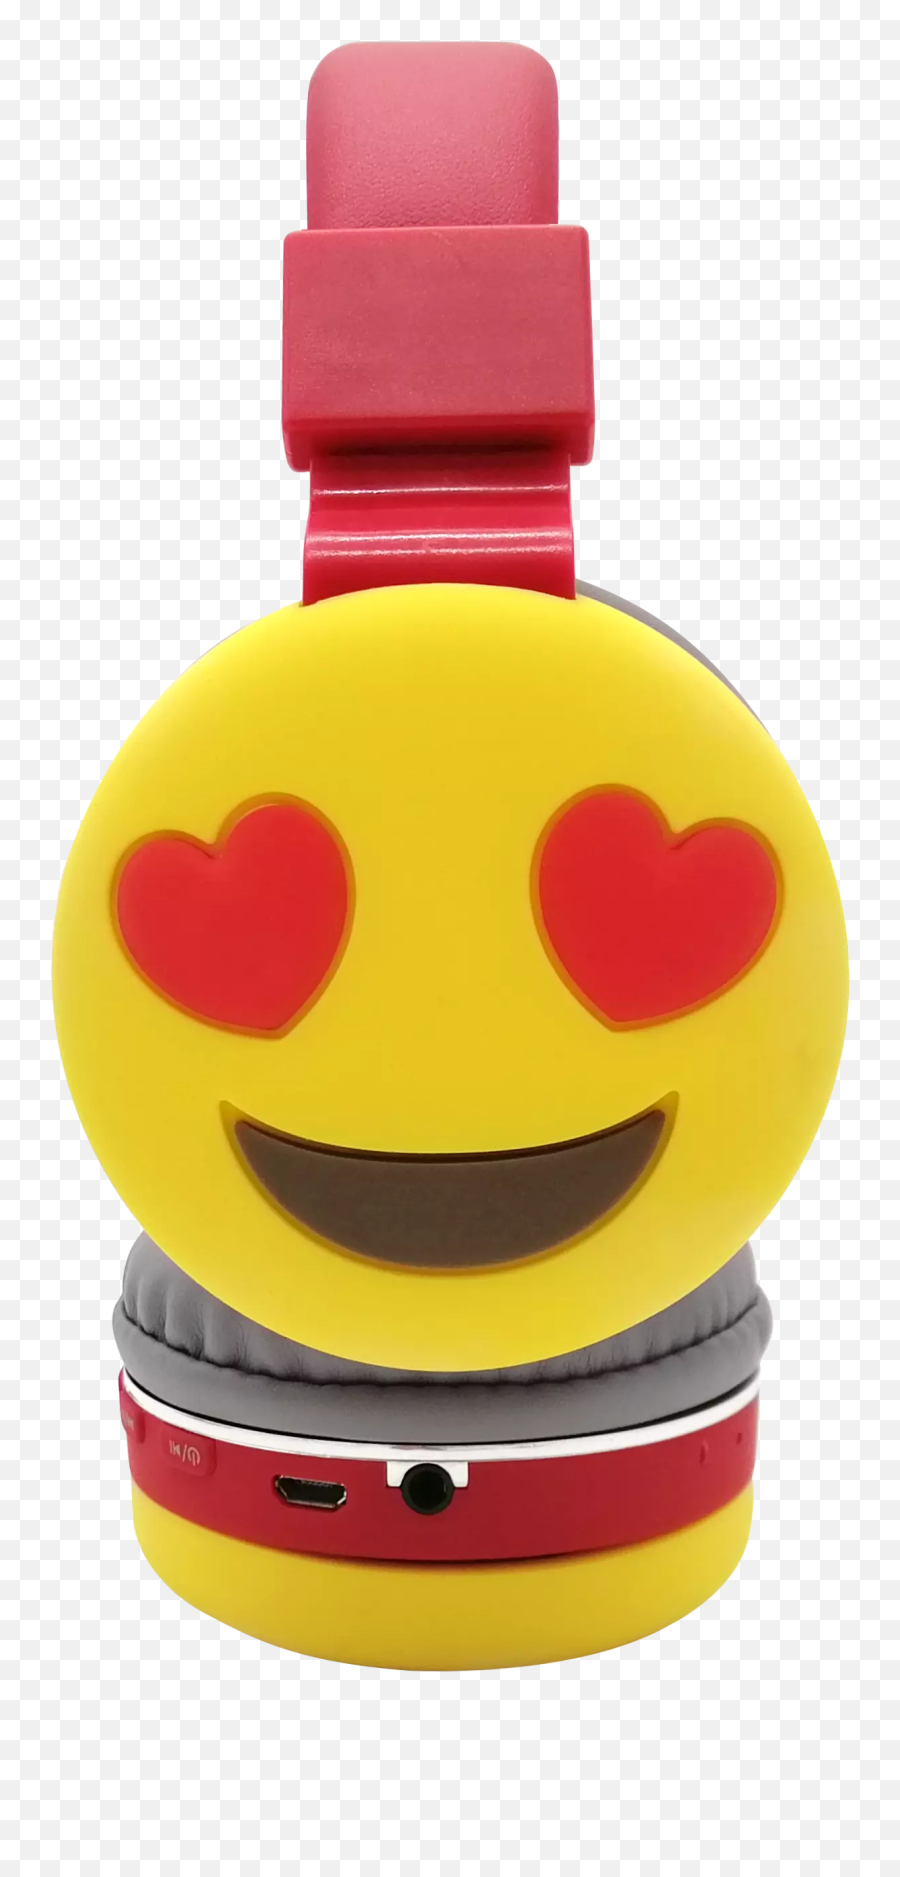 Emoji Design Headphone Bluetooth Wireless Headset With Built - In Microphone For Home School And Online Steaming Happy,Headphone Emoji